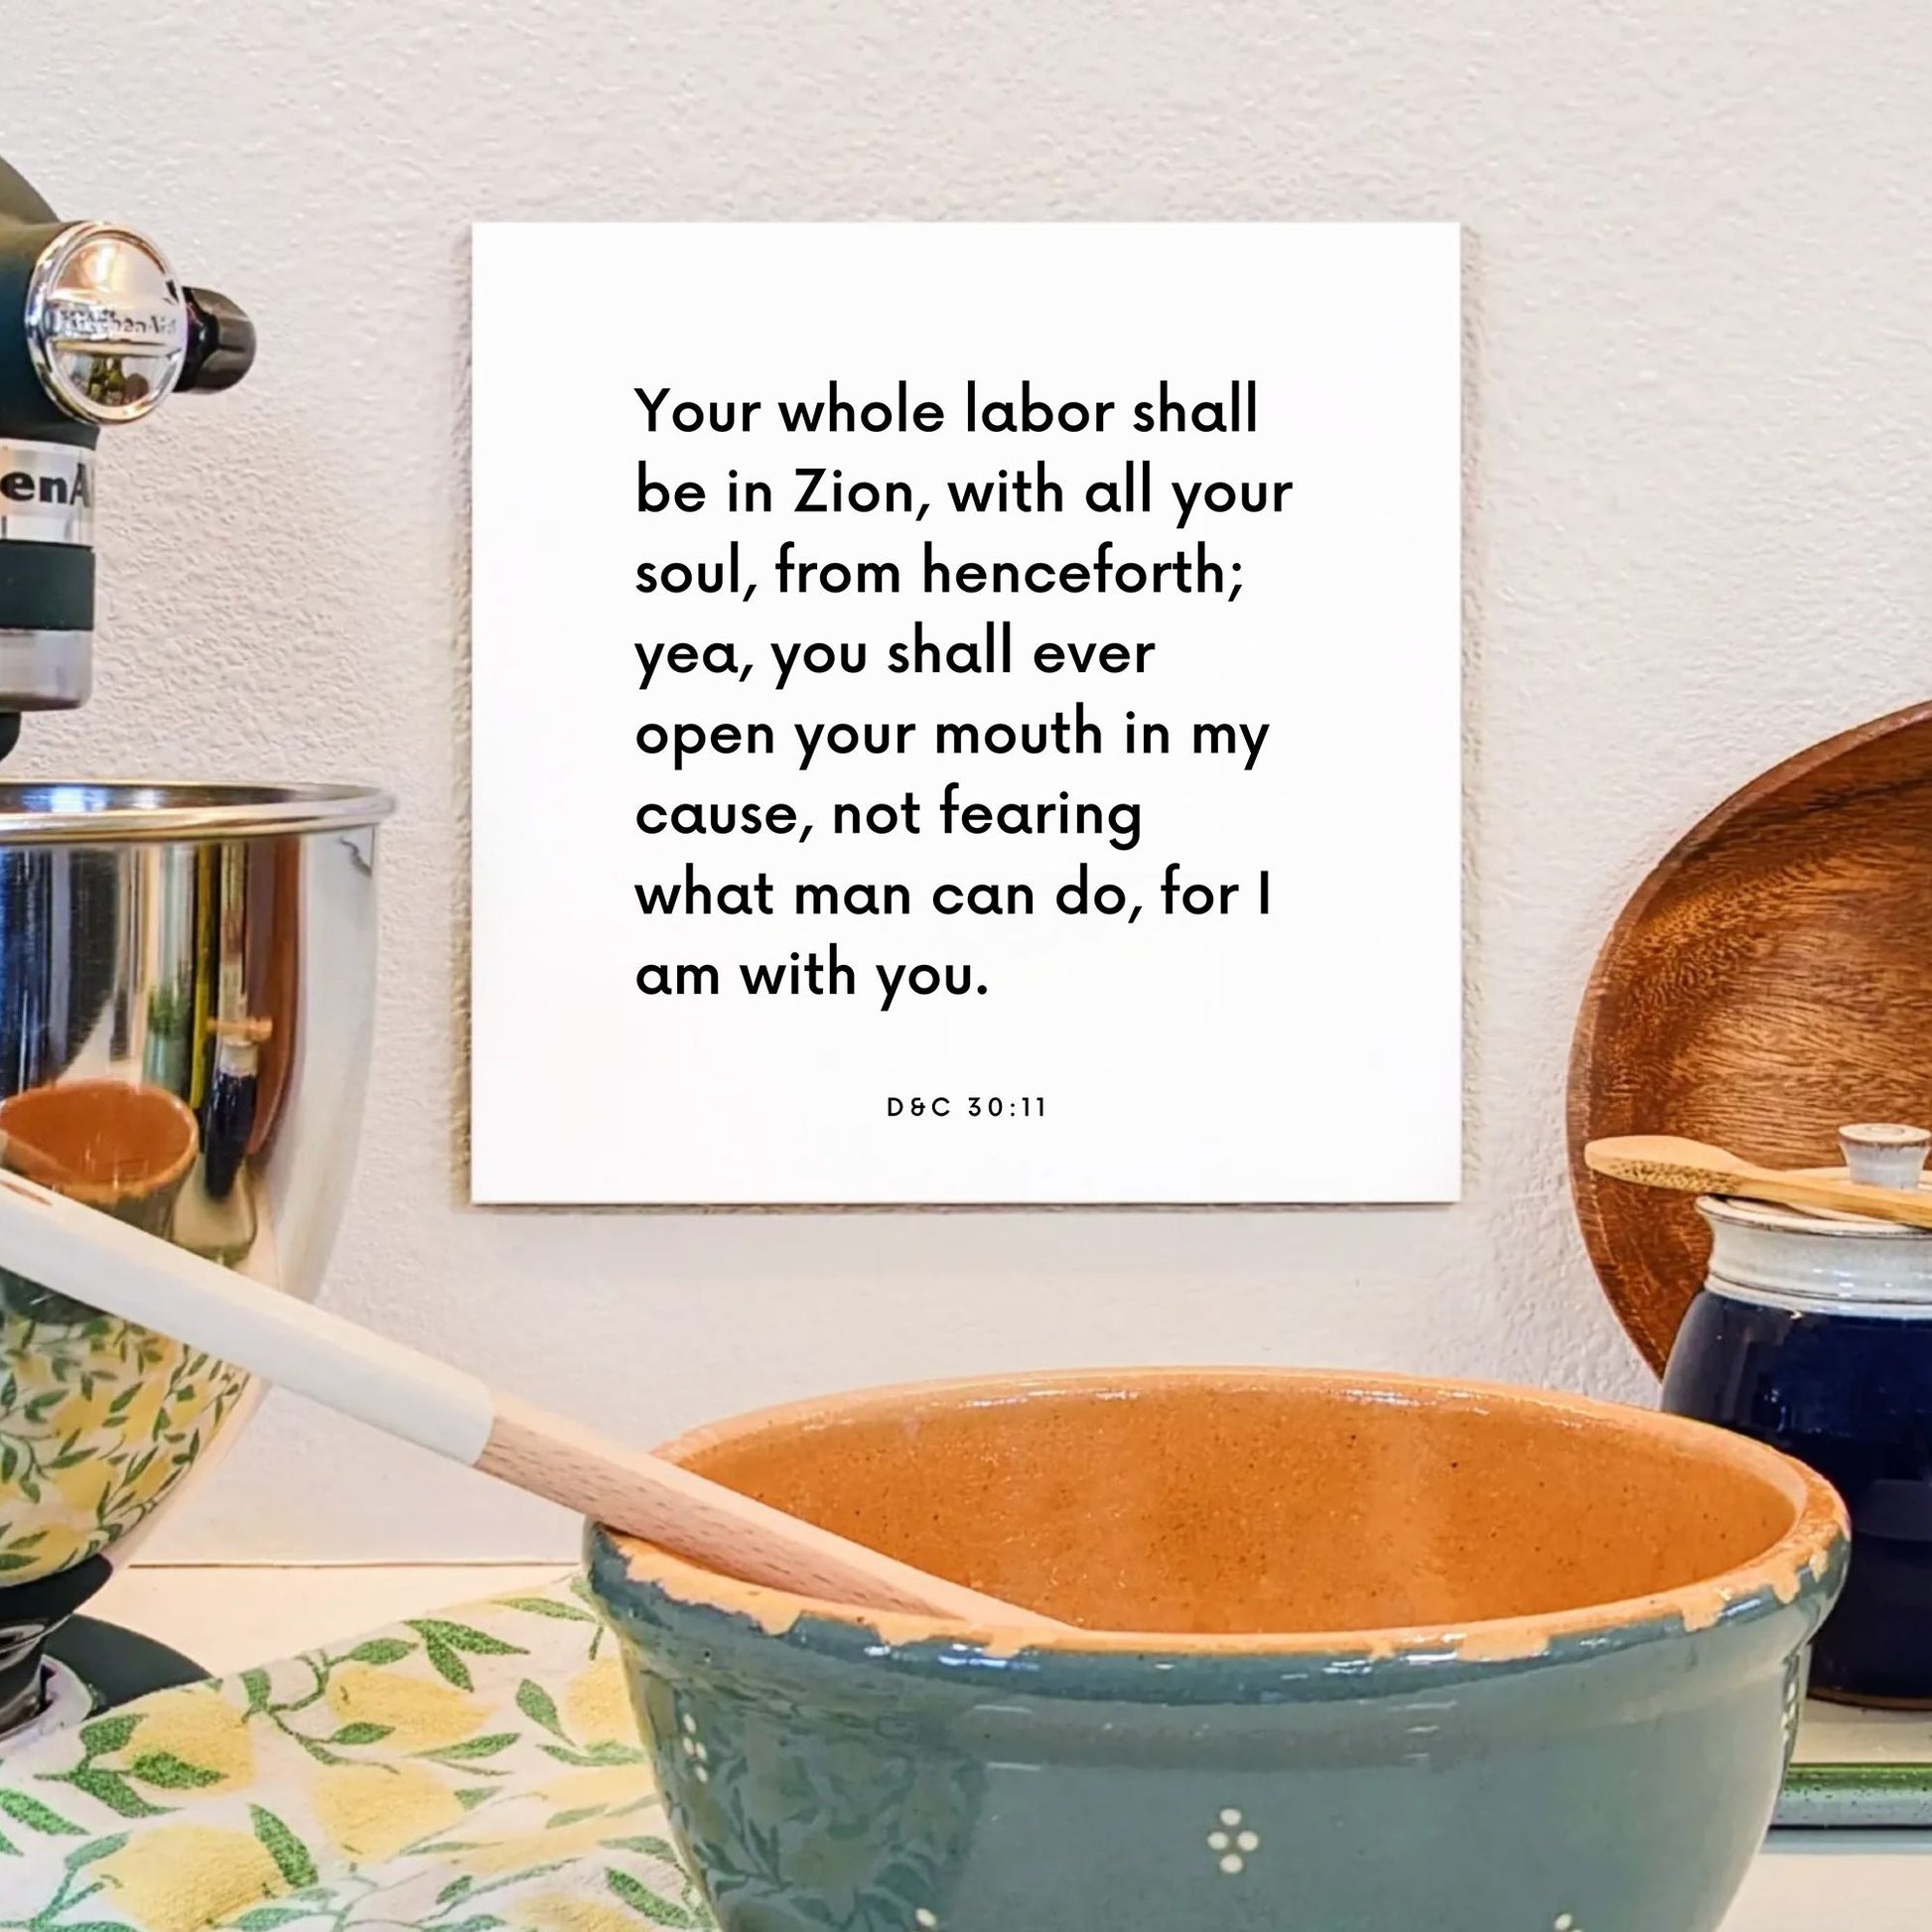 Kitchen mouting of the scripture tile for D&C 30:11 - "Your whole labor shall be in Zion, with all your soul"